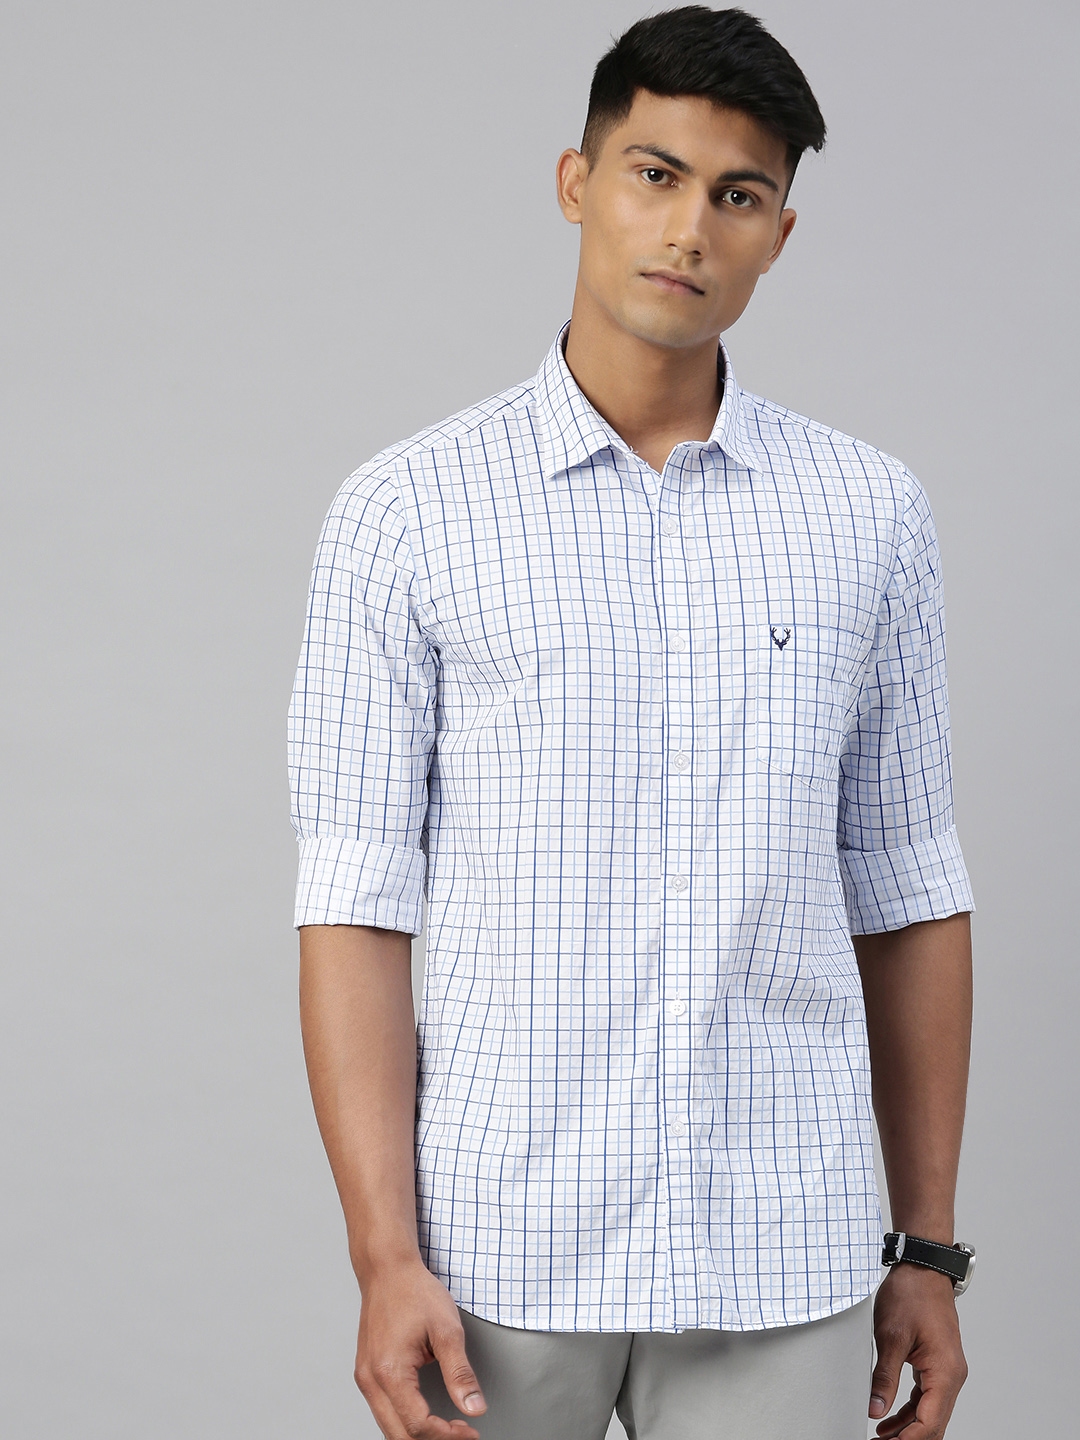 Buy Allen Solly Men White & Blue Modern Fit Checked Casual Shirt ...